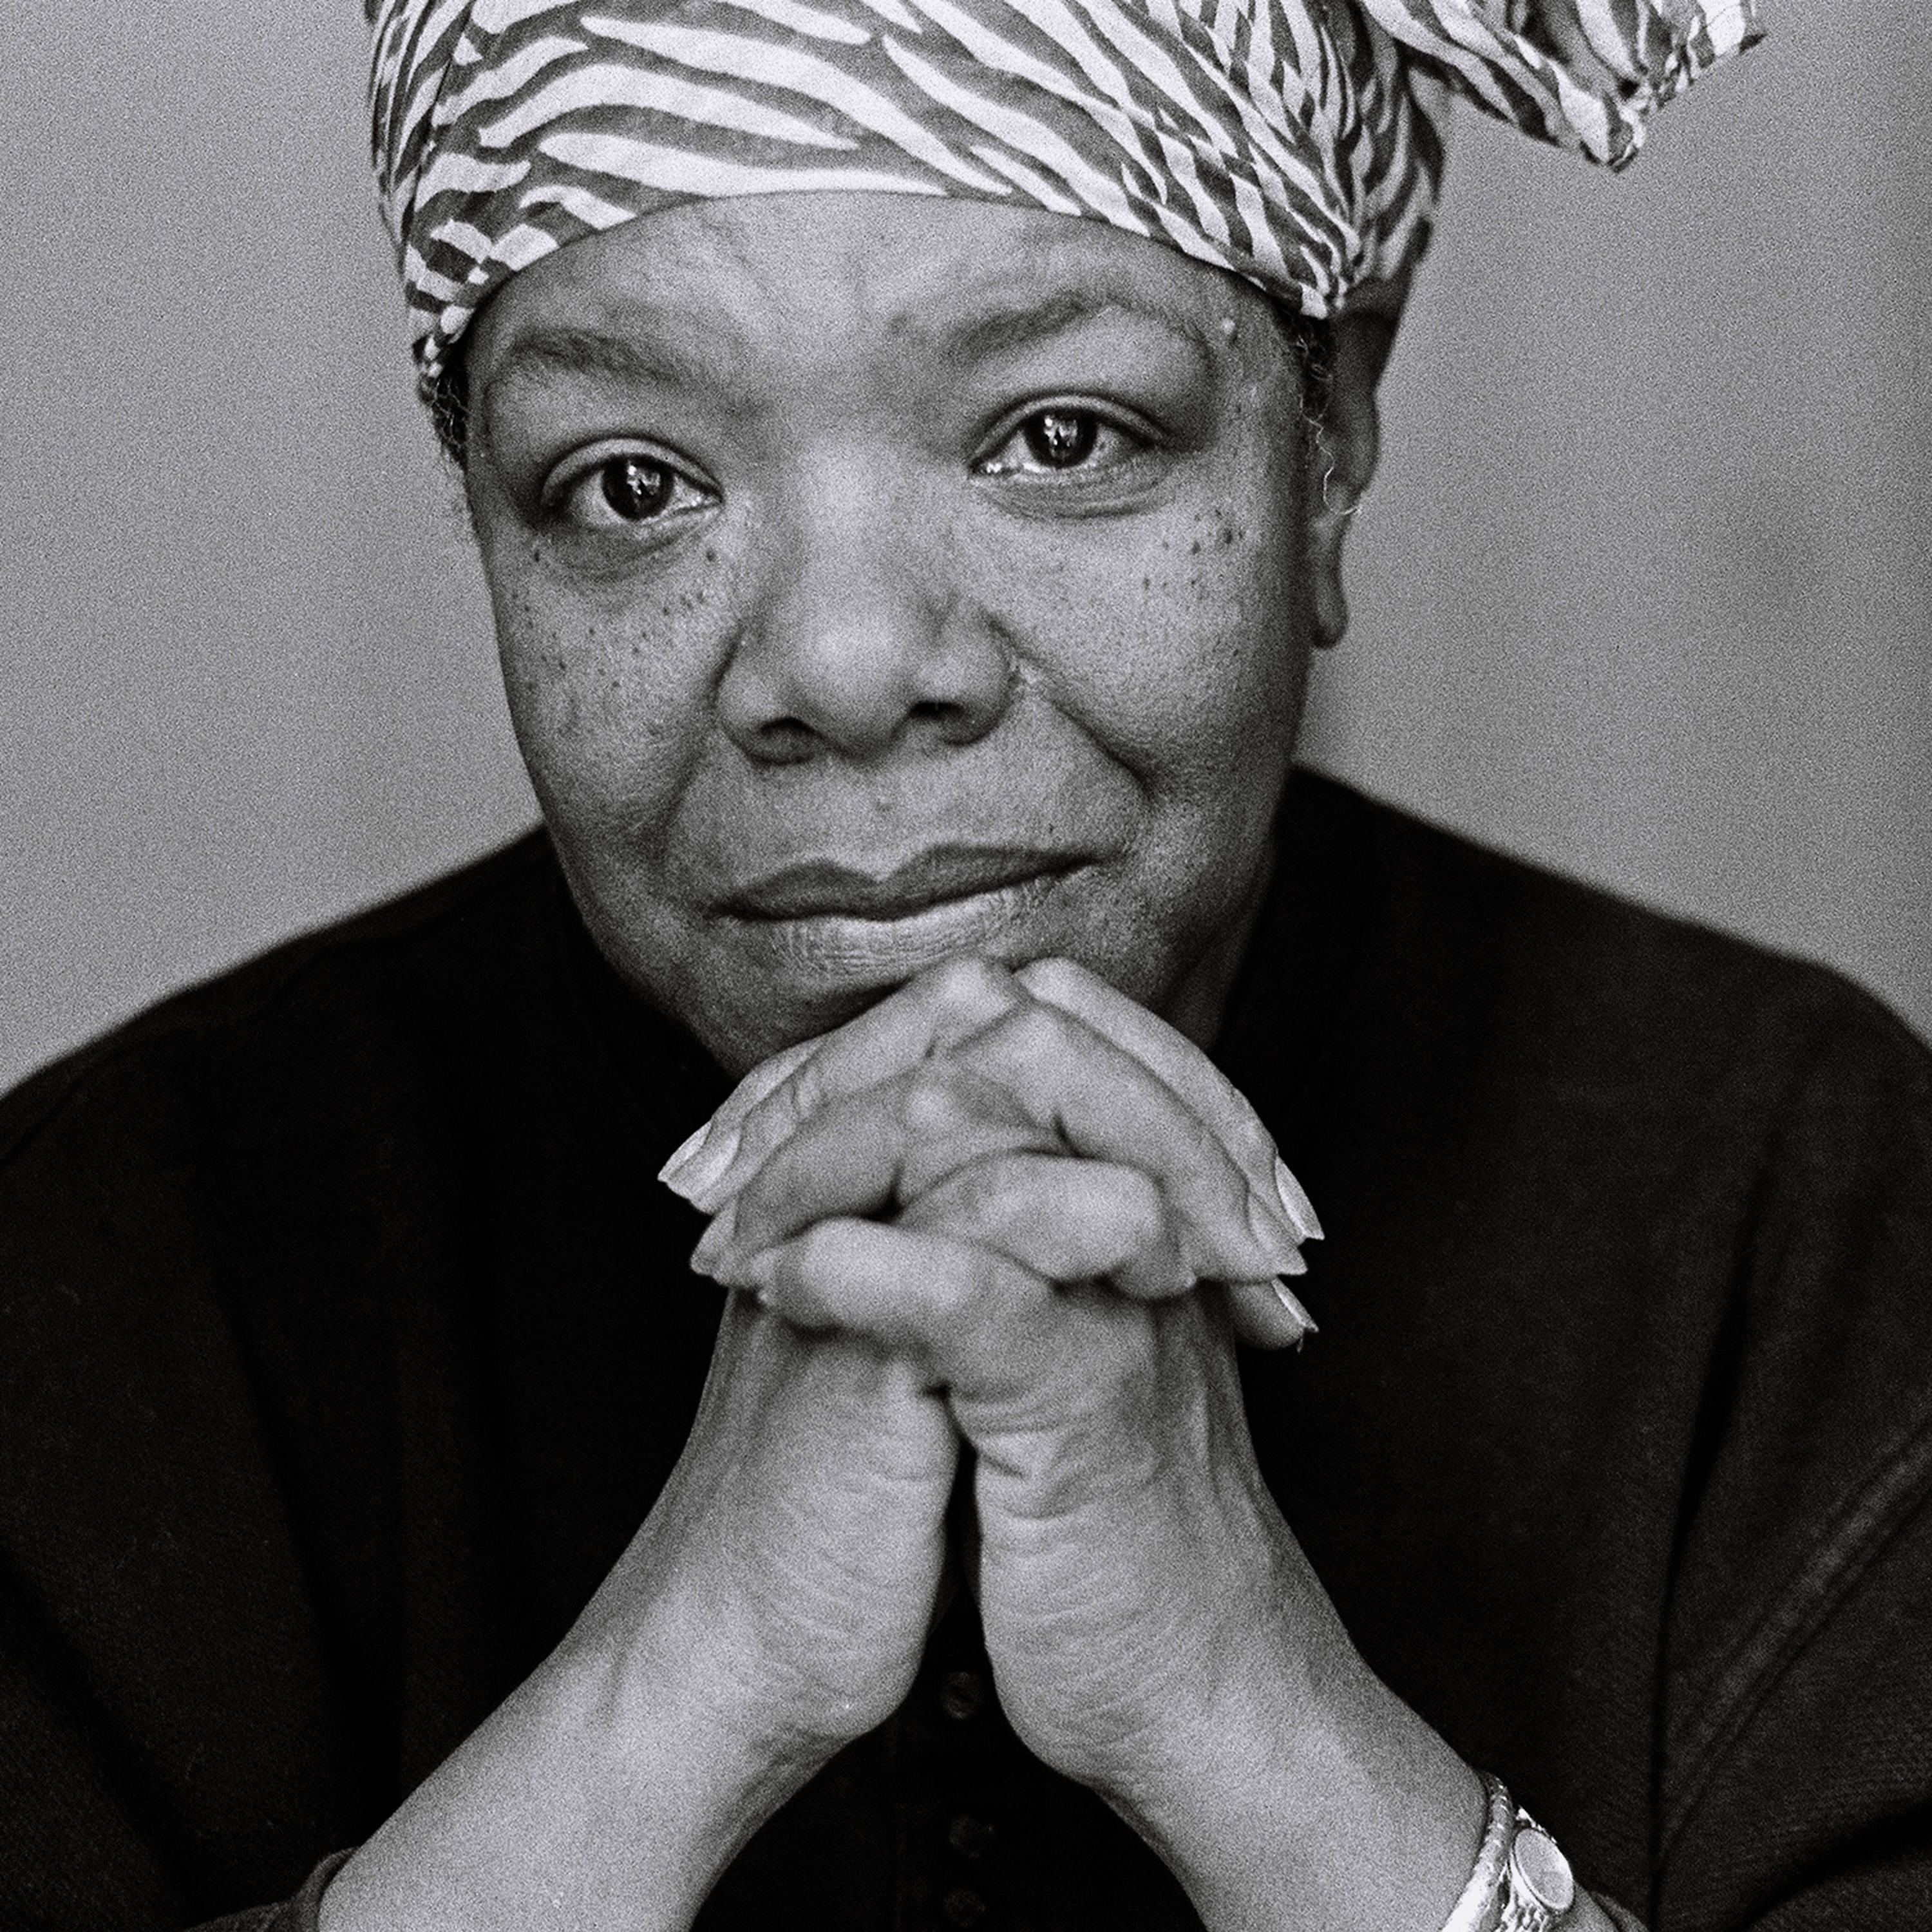 cover art for “Caged Bird” by Maya Angelou